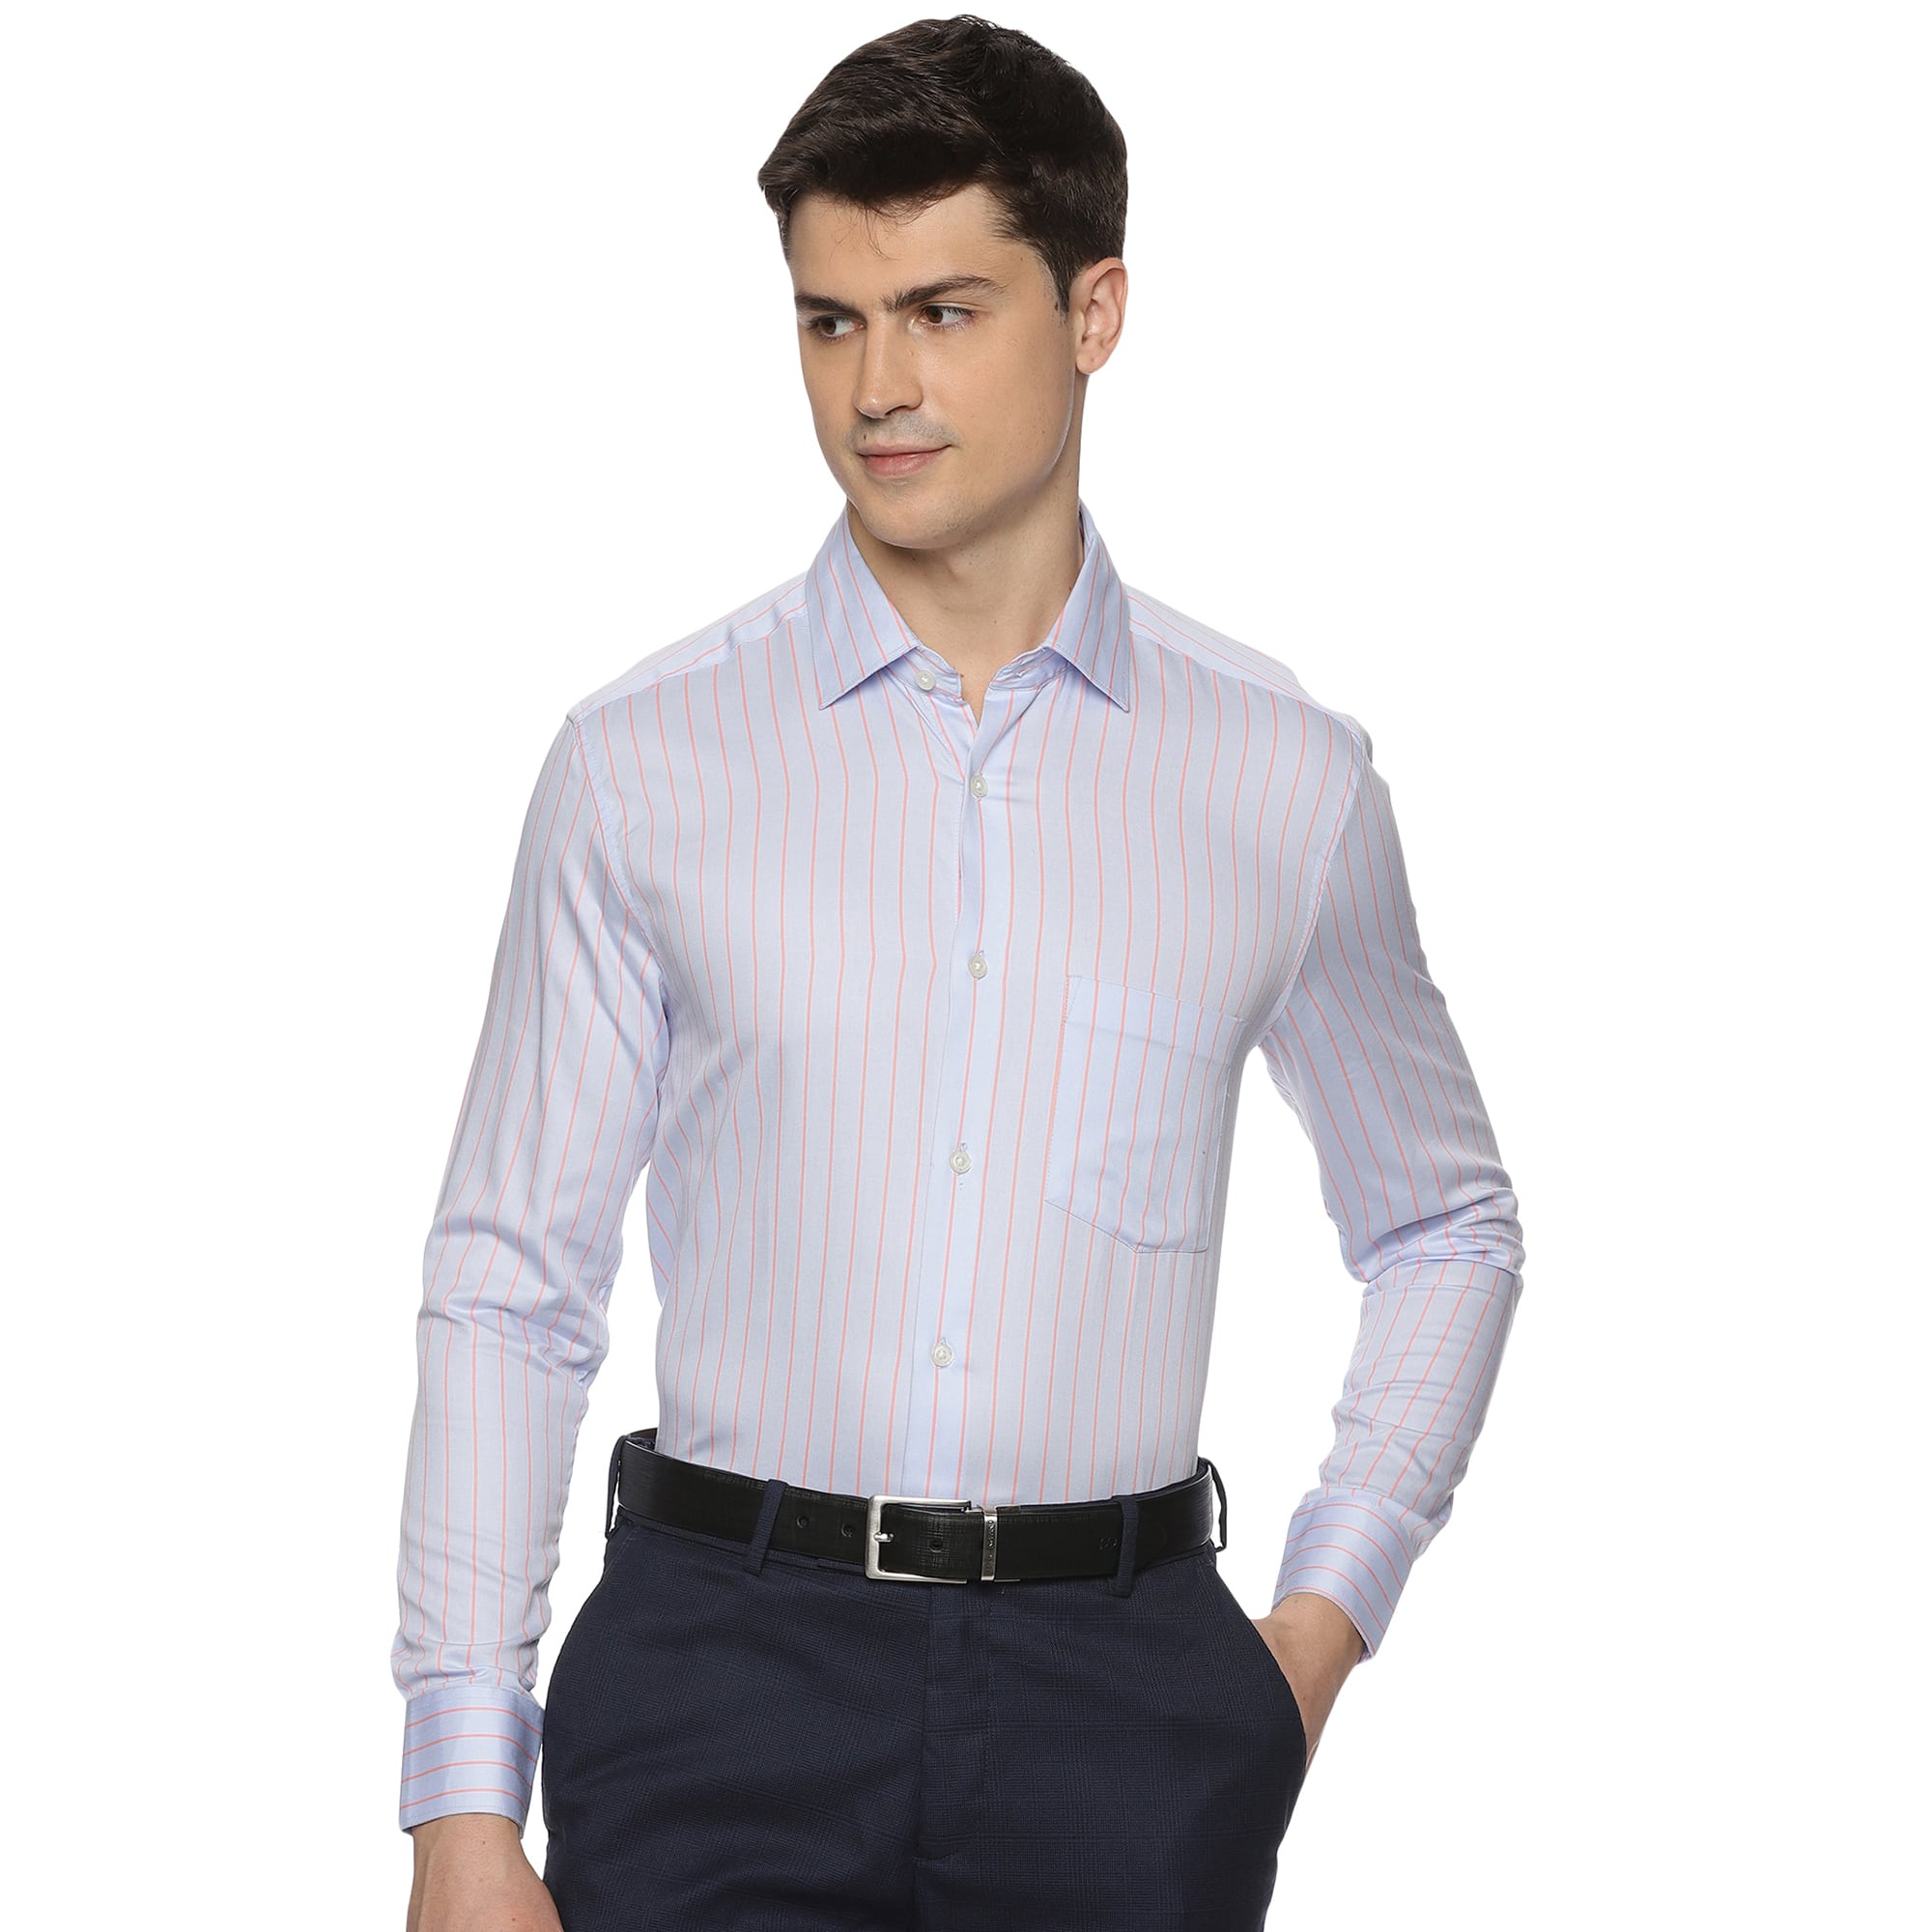 Enigma Cotton Stripes Shirt In Light Blue - The Formal Club